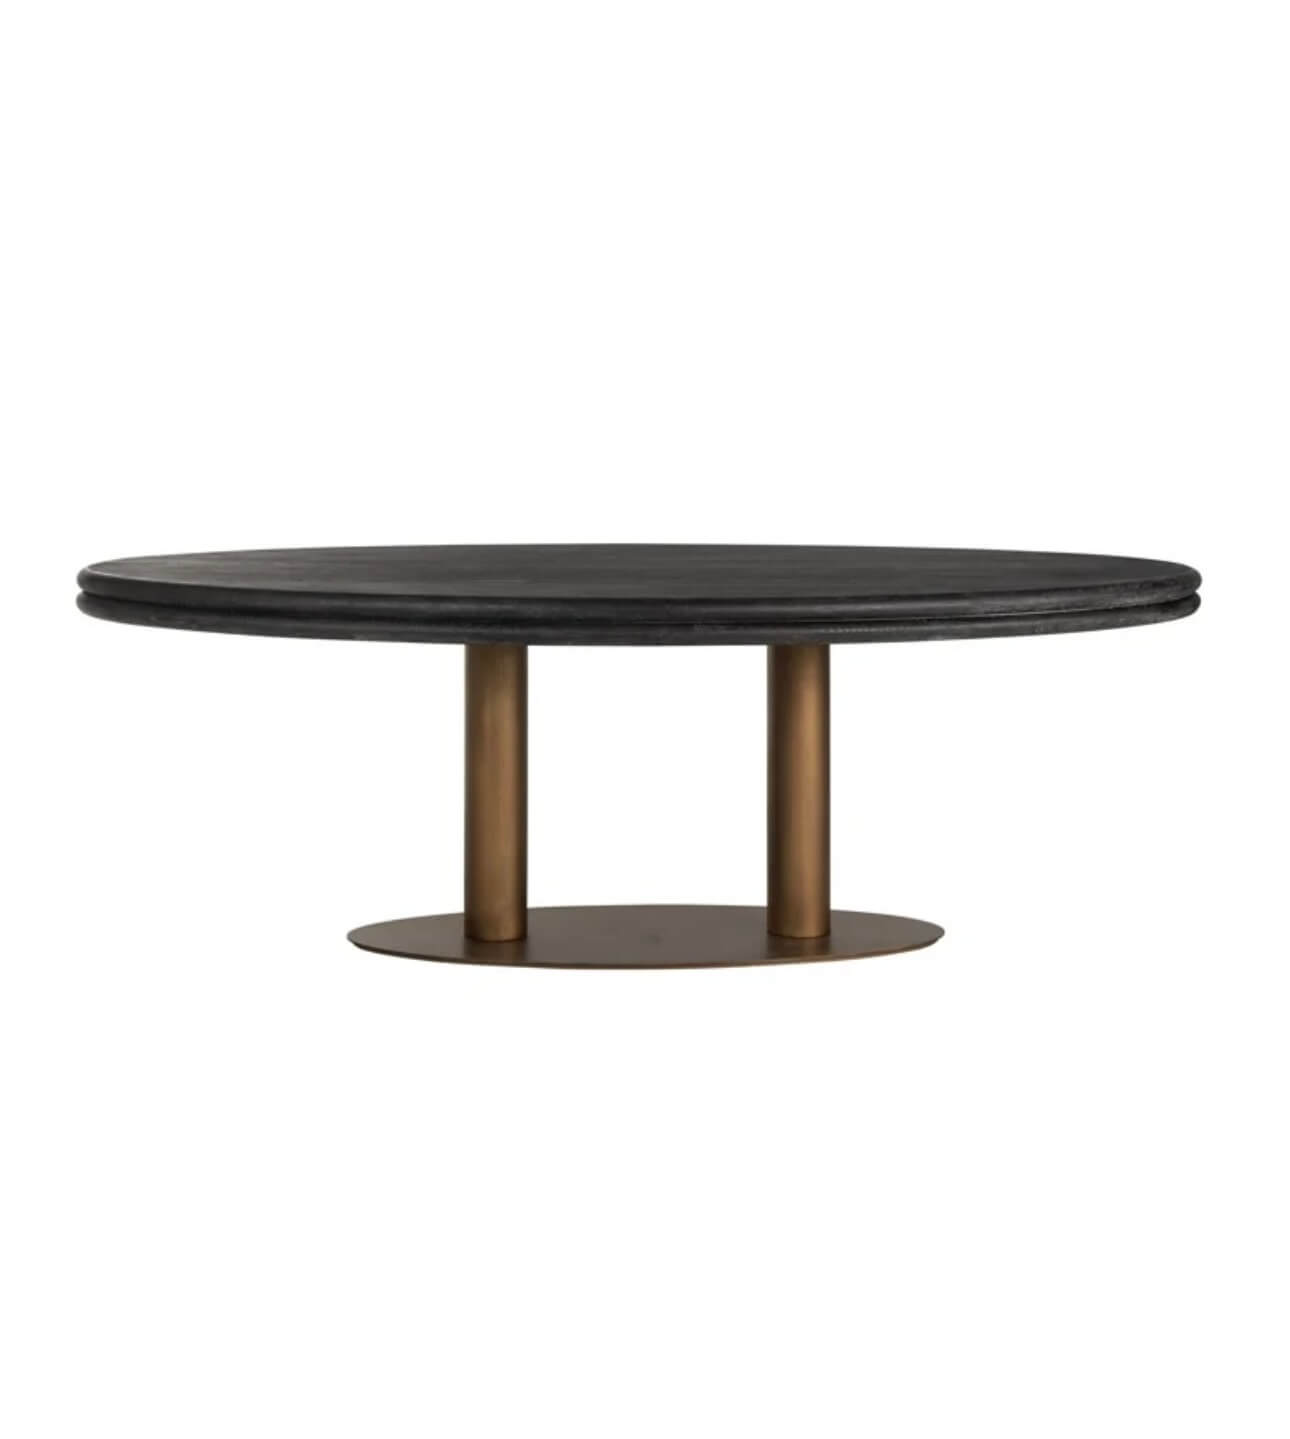 Black Rustic Oval Dining Table